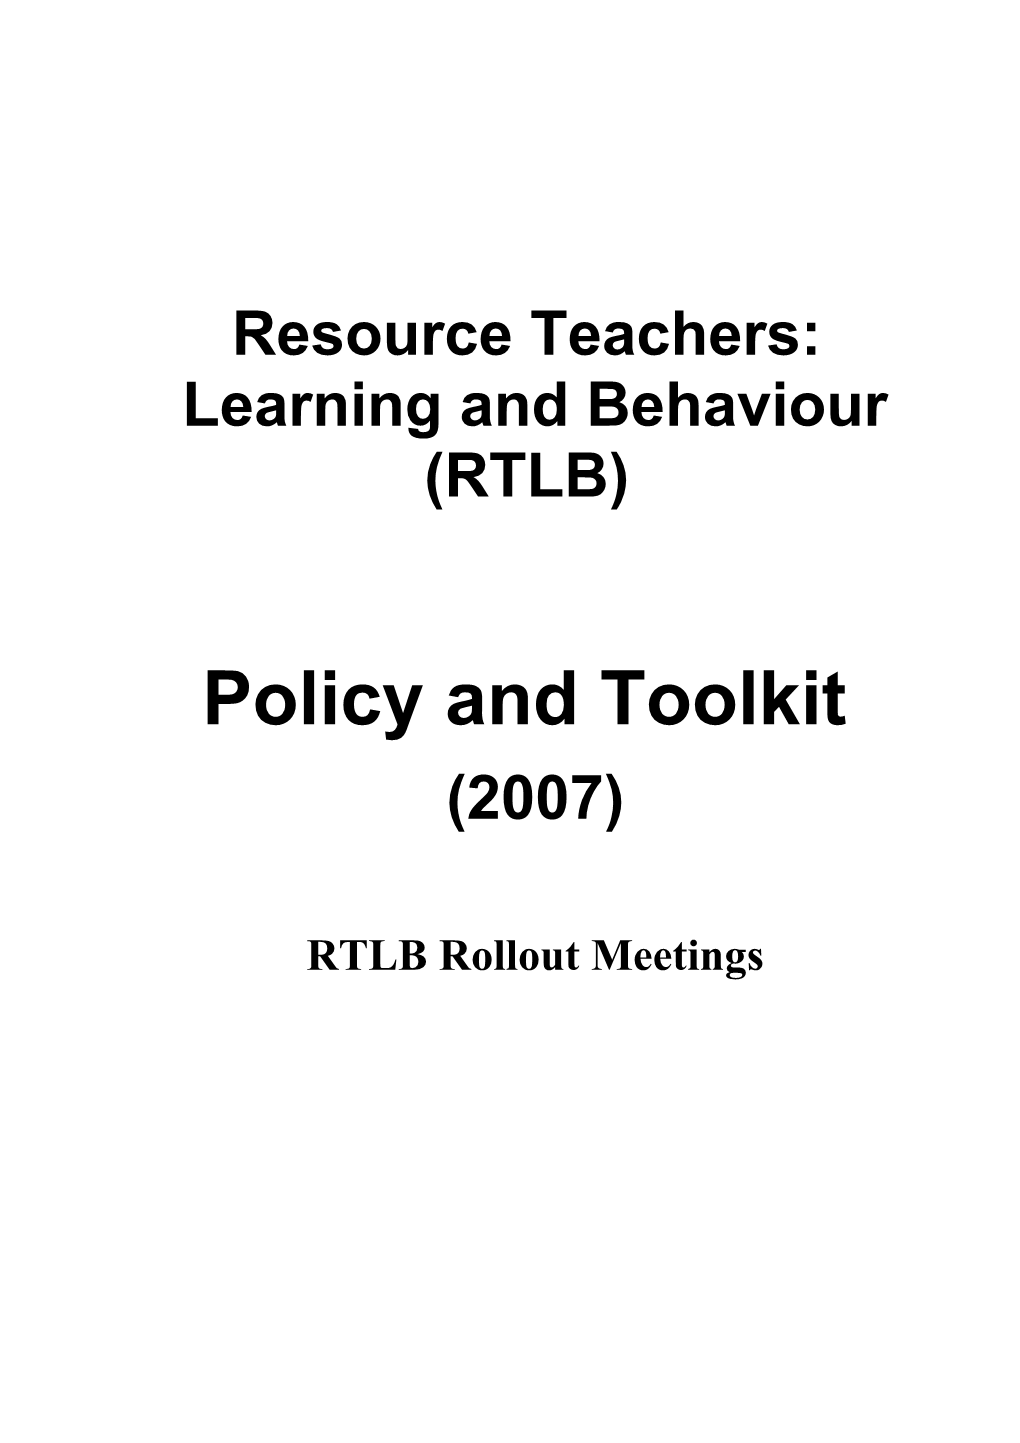 Plan for Policy and Toolkit Document for RTLB